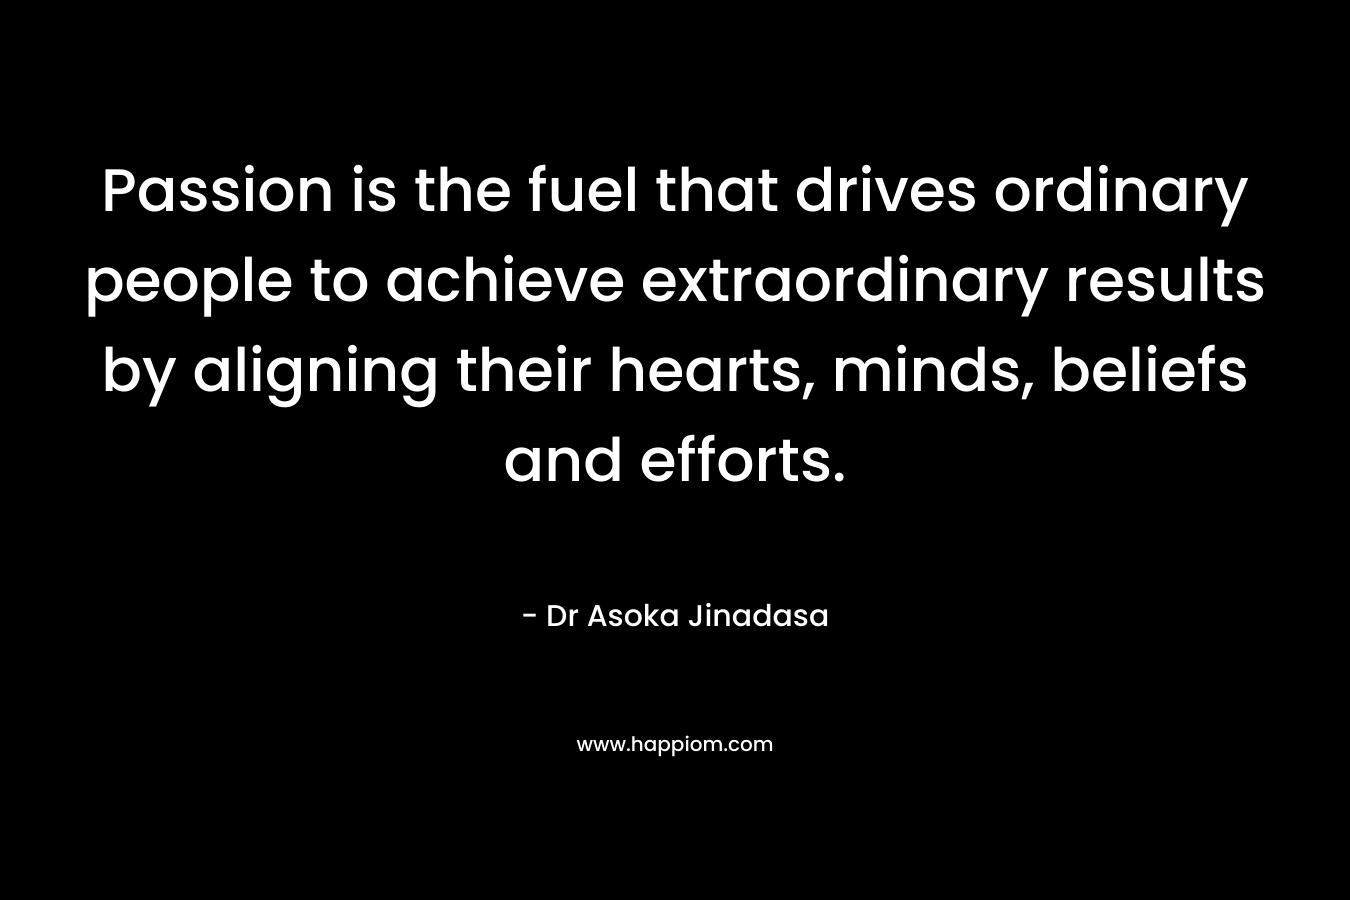 Passion is the fuel that drives ordinary people to achieve extraordinary results by aligning their hearts, minds, beliefs and efforts. – Dr Asoka Jinadasa